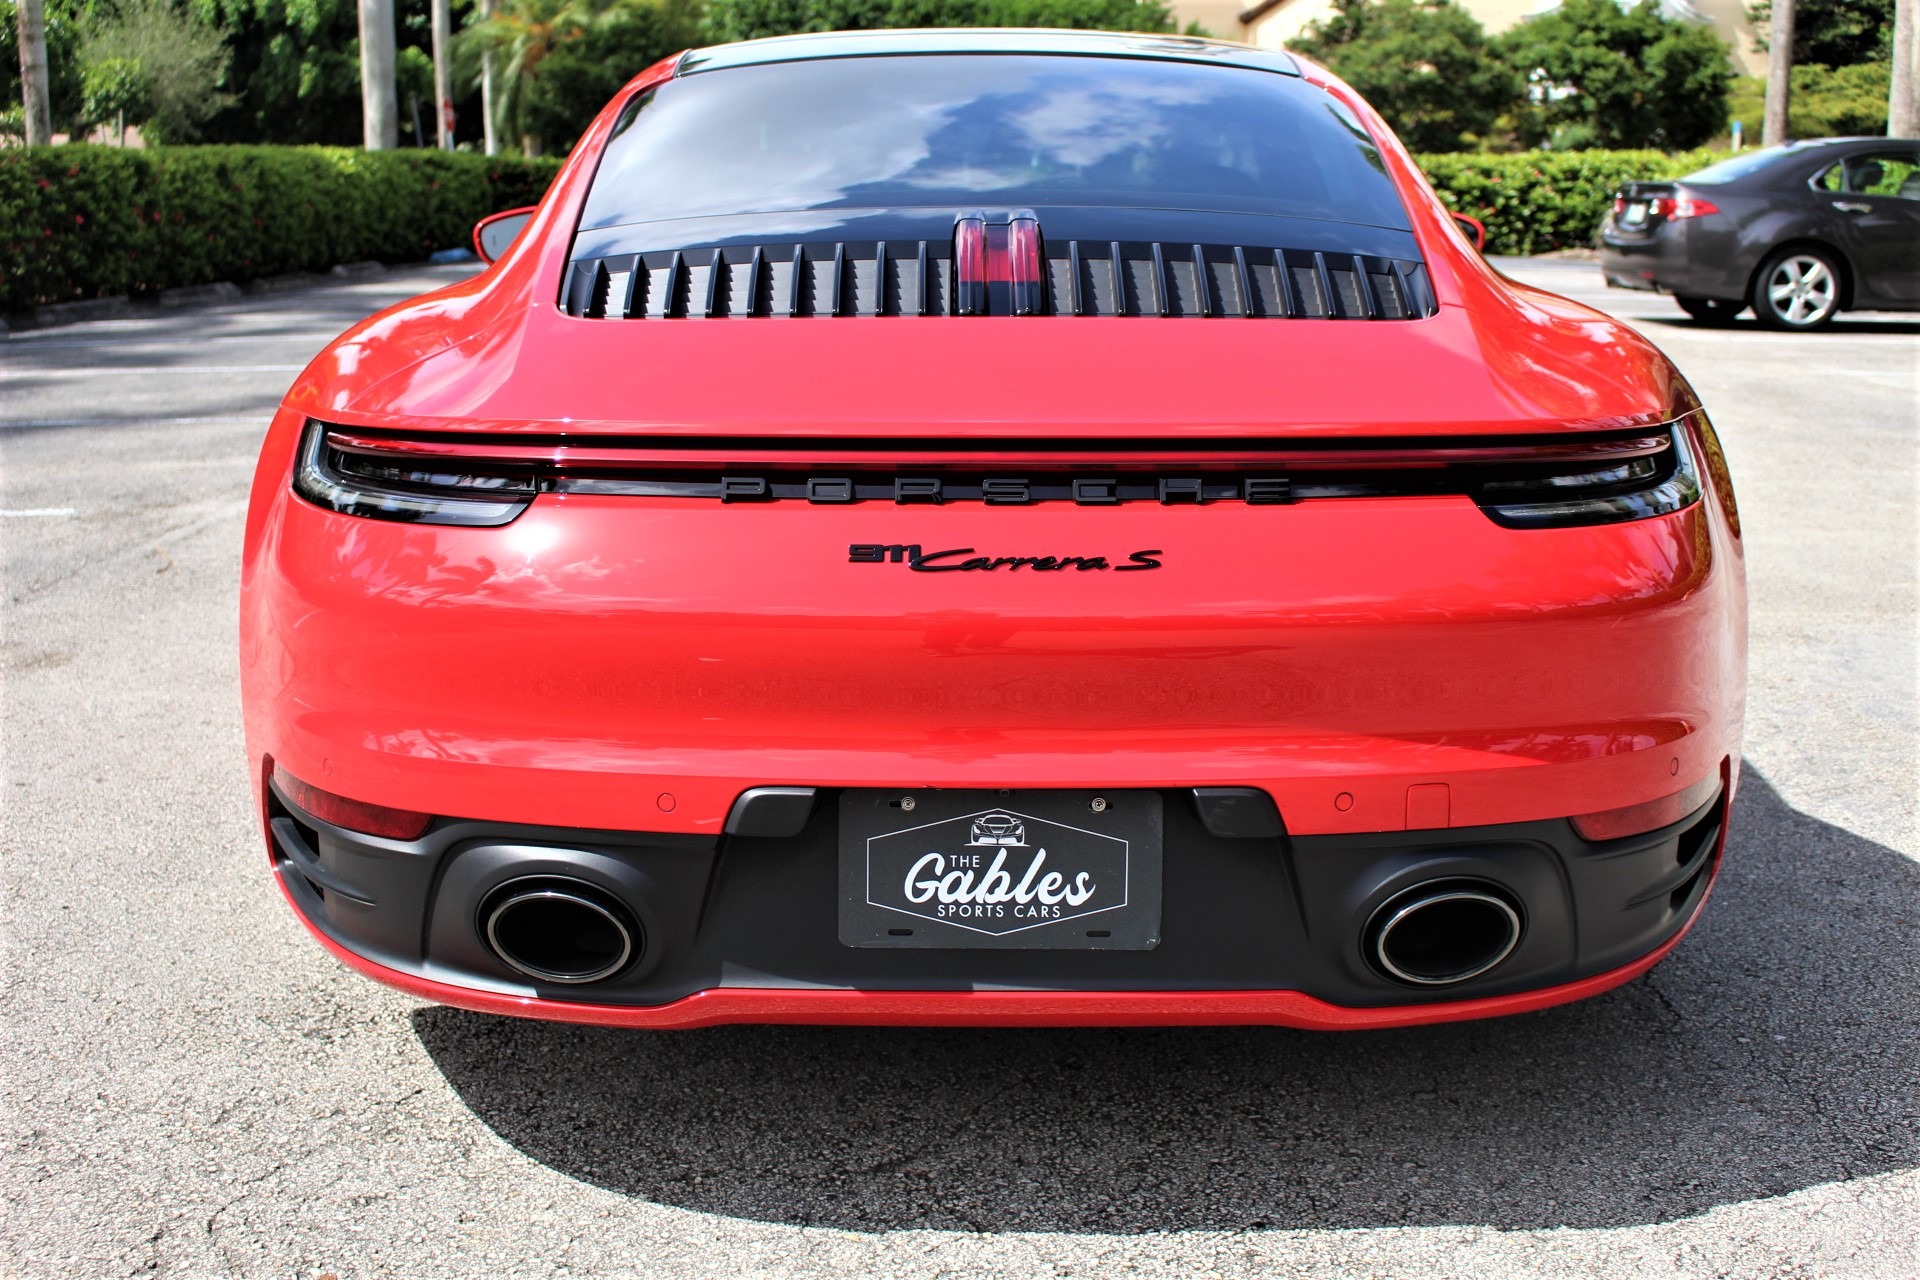 Used 2021 Porsche 911 Carrera S for sale Sold at The Gables Sports Cars in Miami FL 33146 4